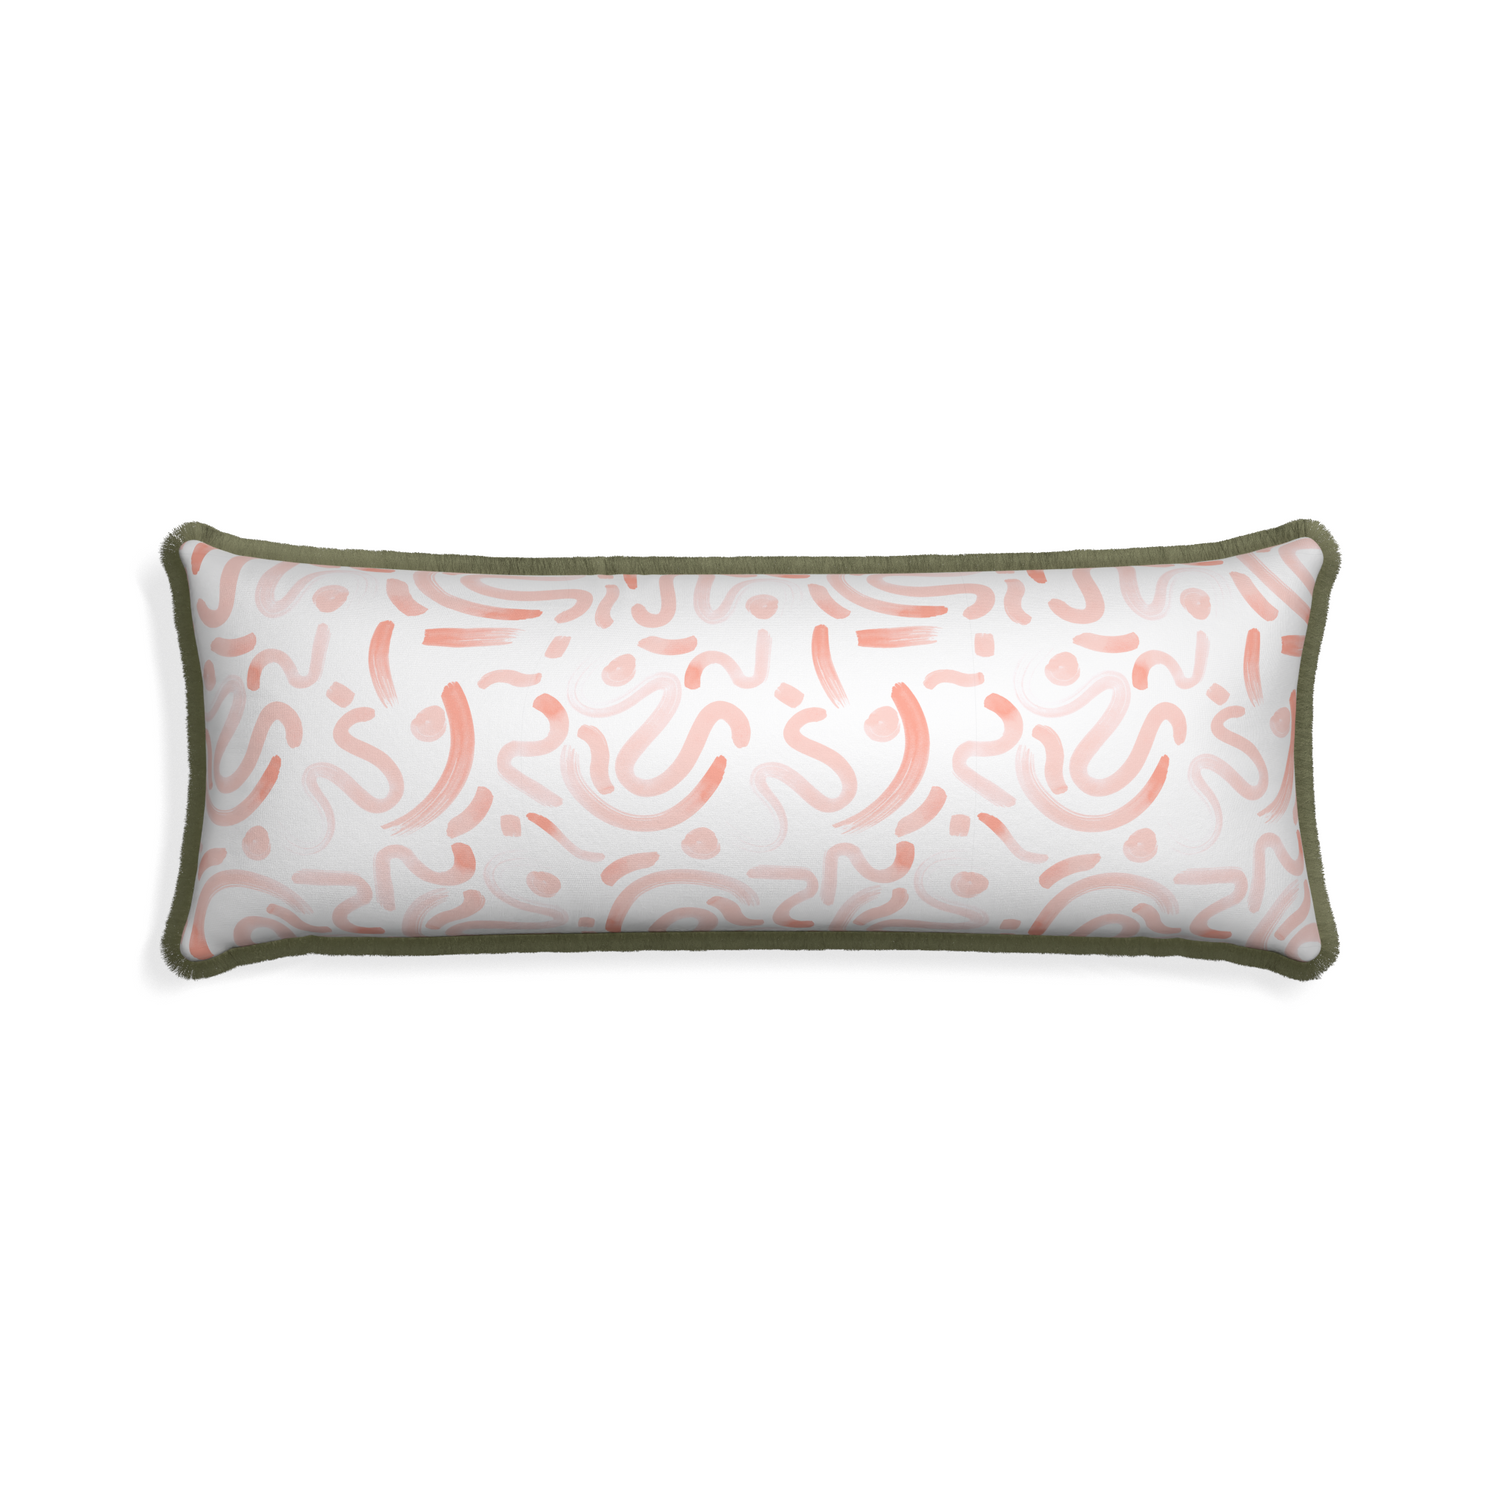 Xl-lumbar hockney pink custom pink graphicpillow with sage fringe on white background